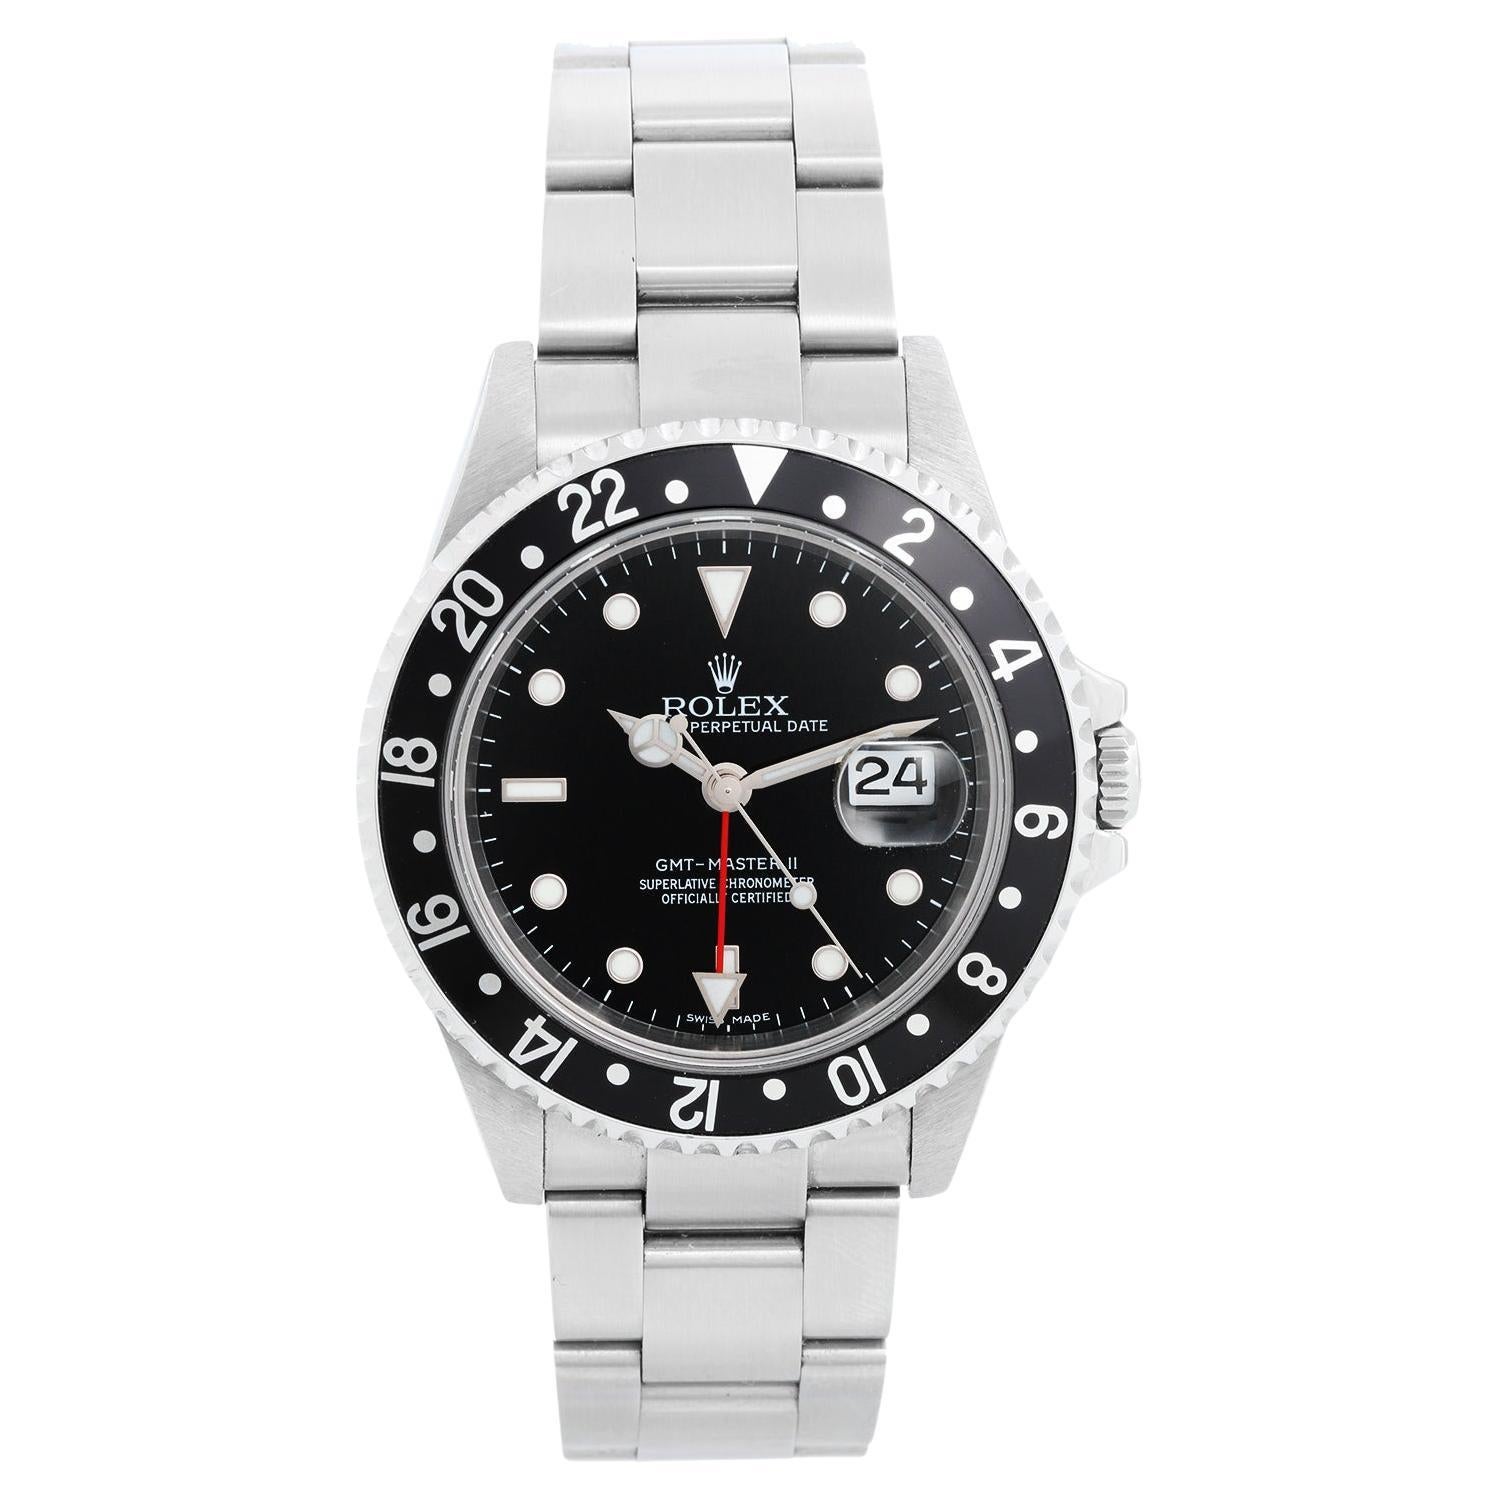 Men's Rolex GMT-Master II Watch 16710LN For Sale at 1stDibs